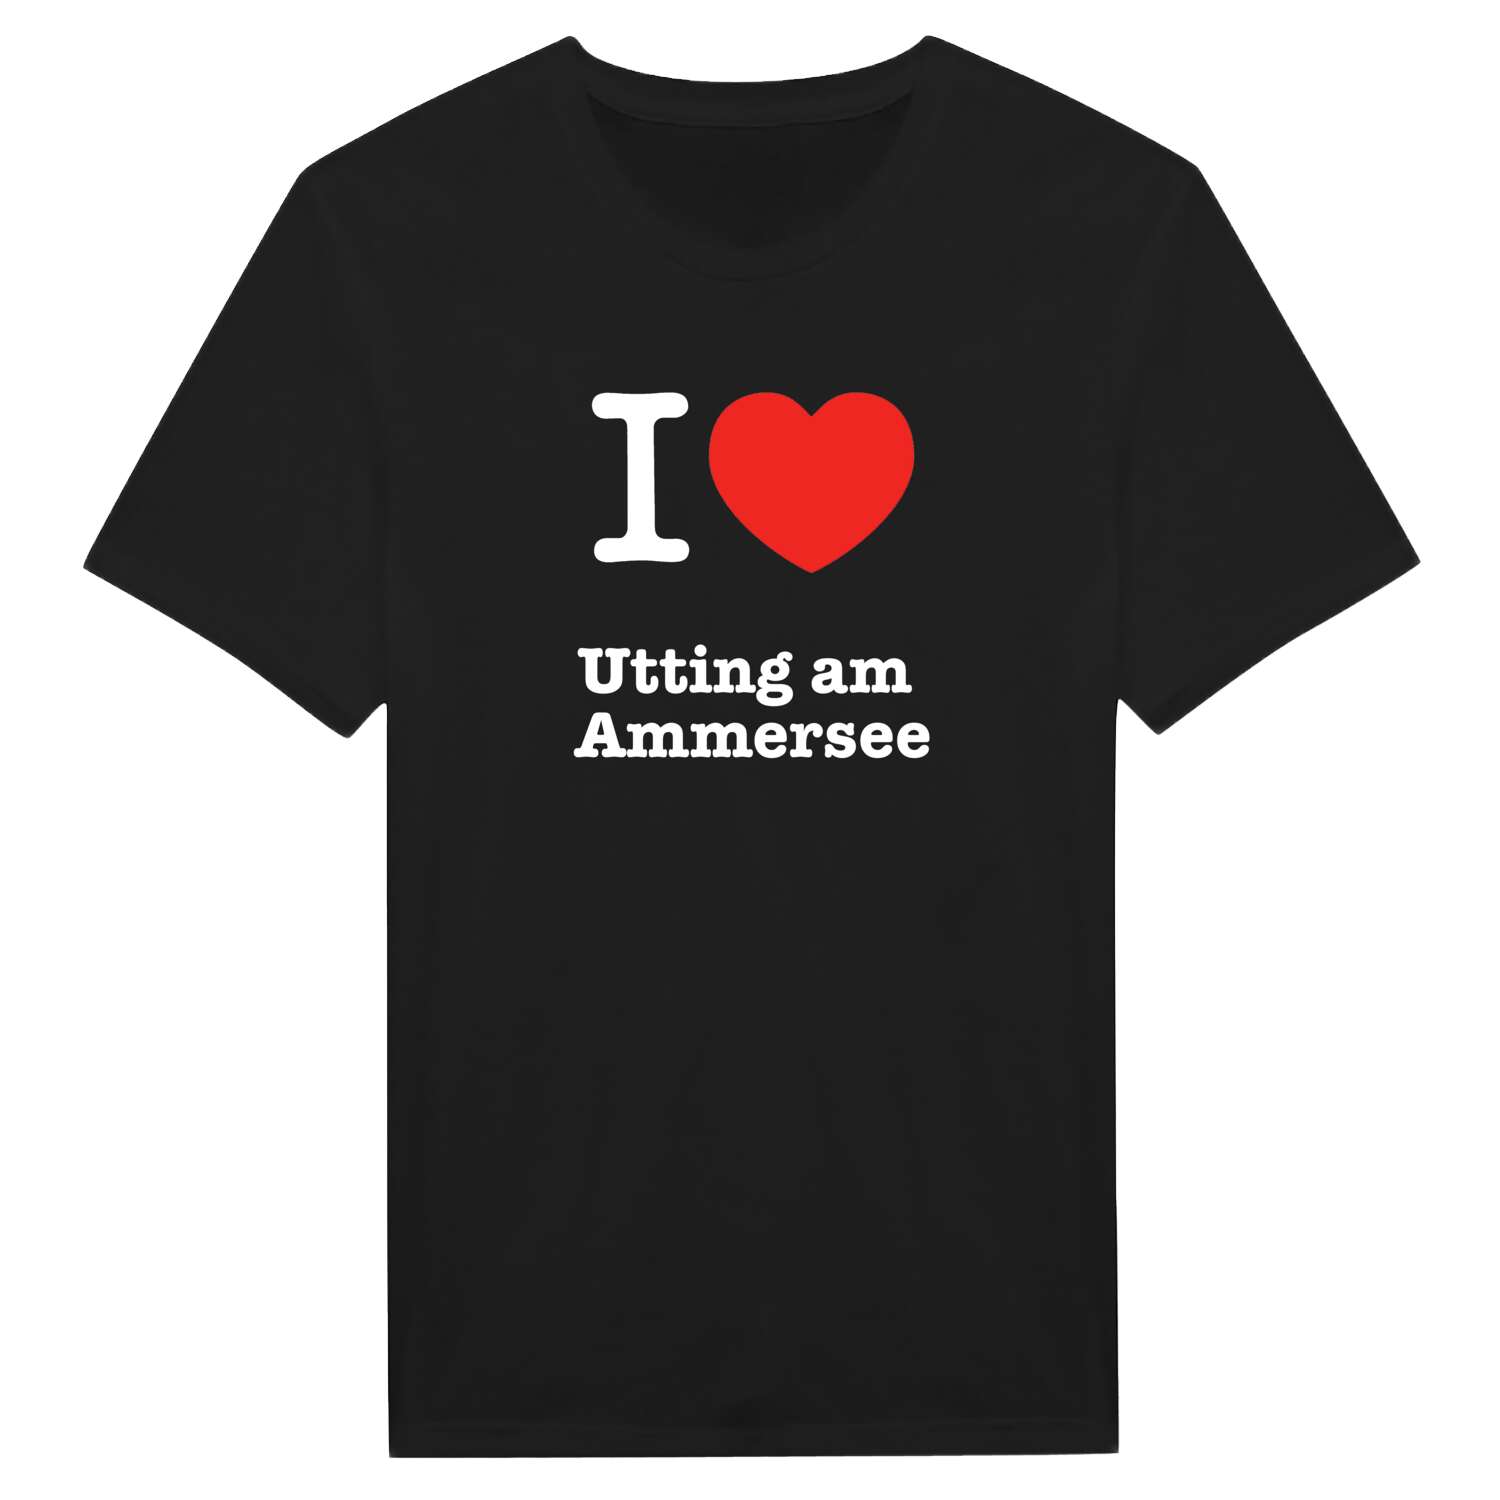 Utting am Ammersee T-Shirt »I love«